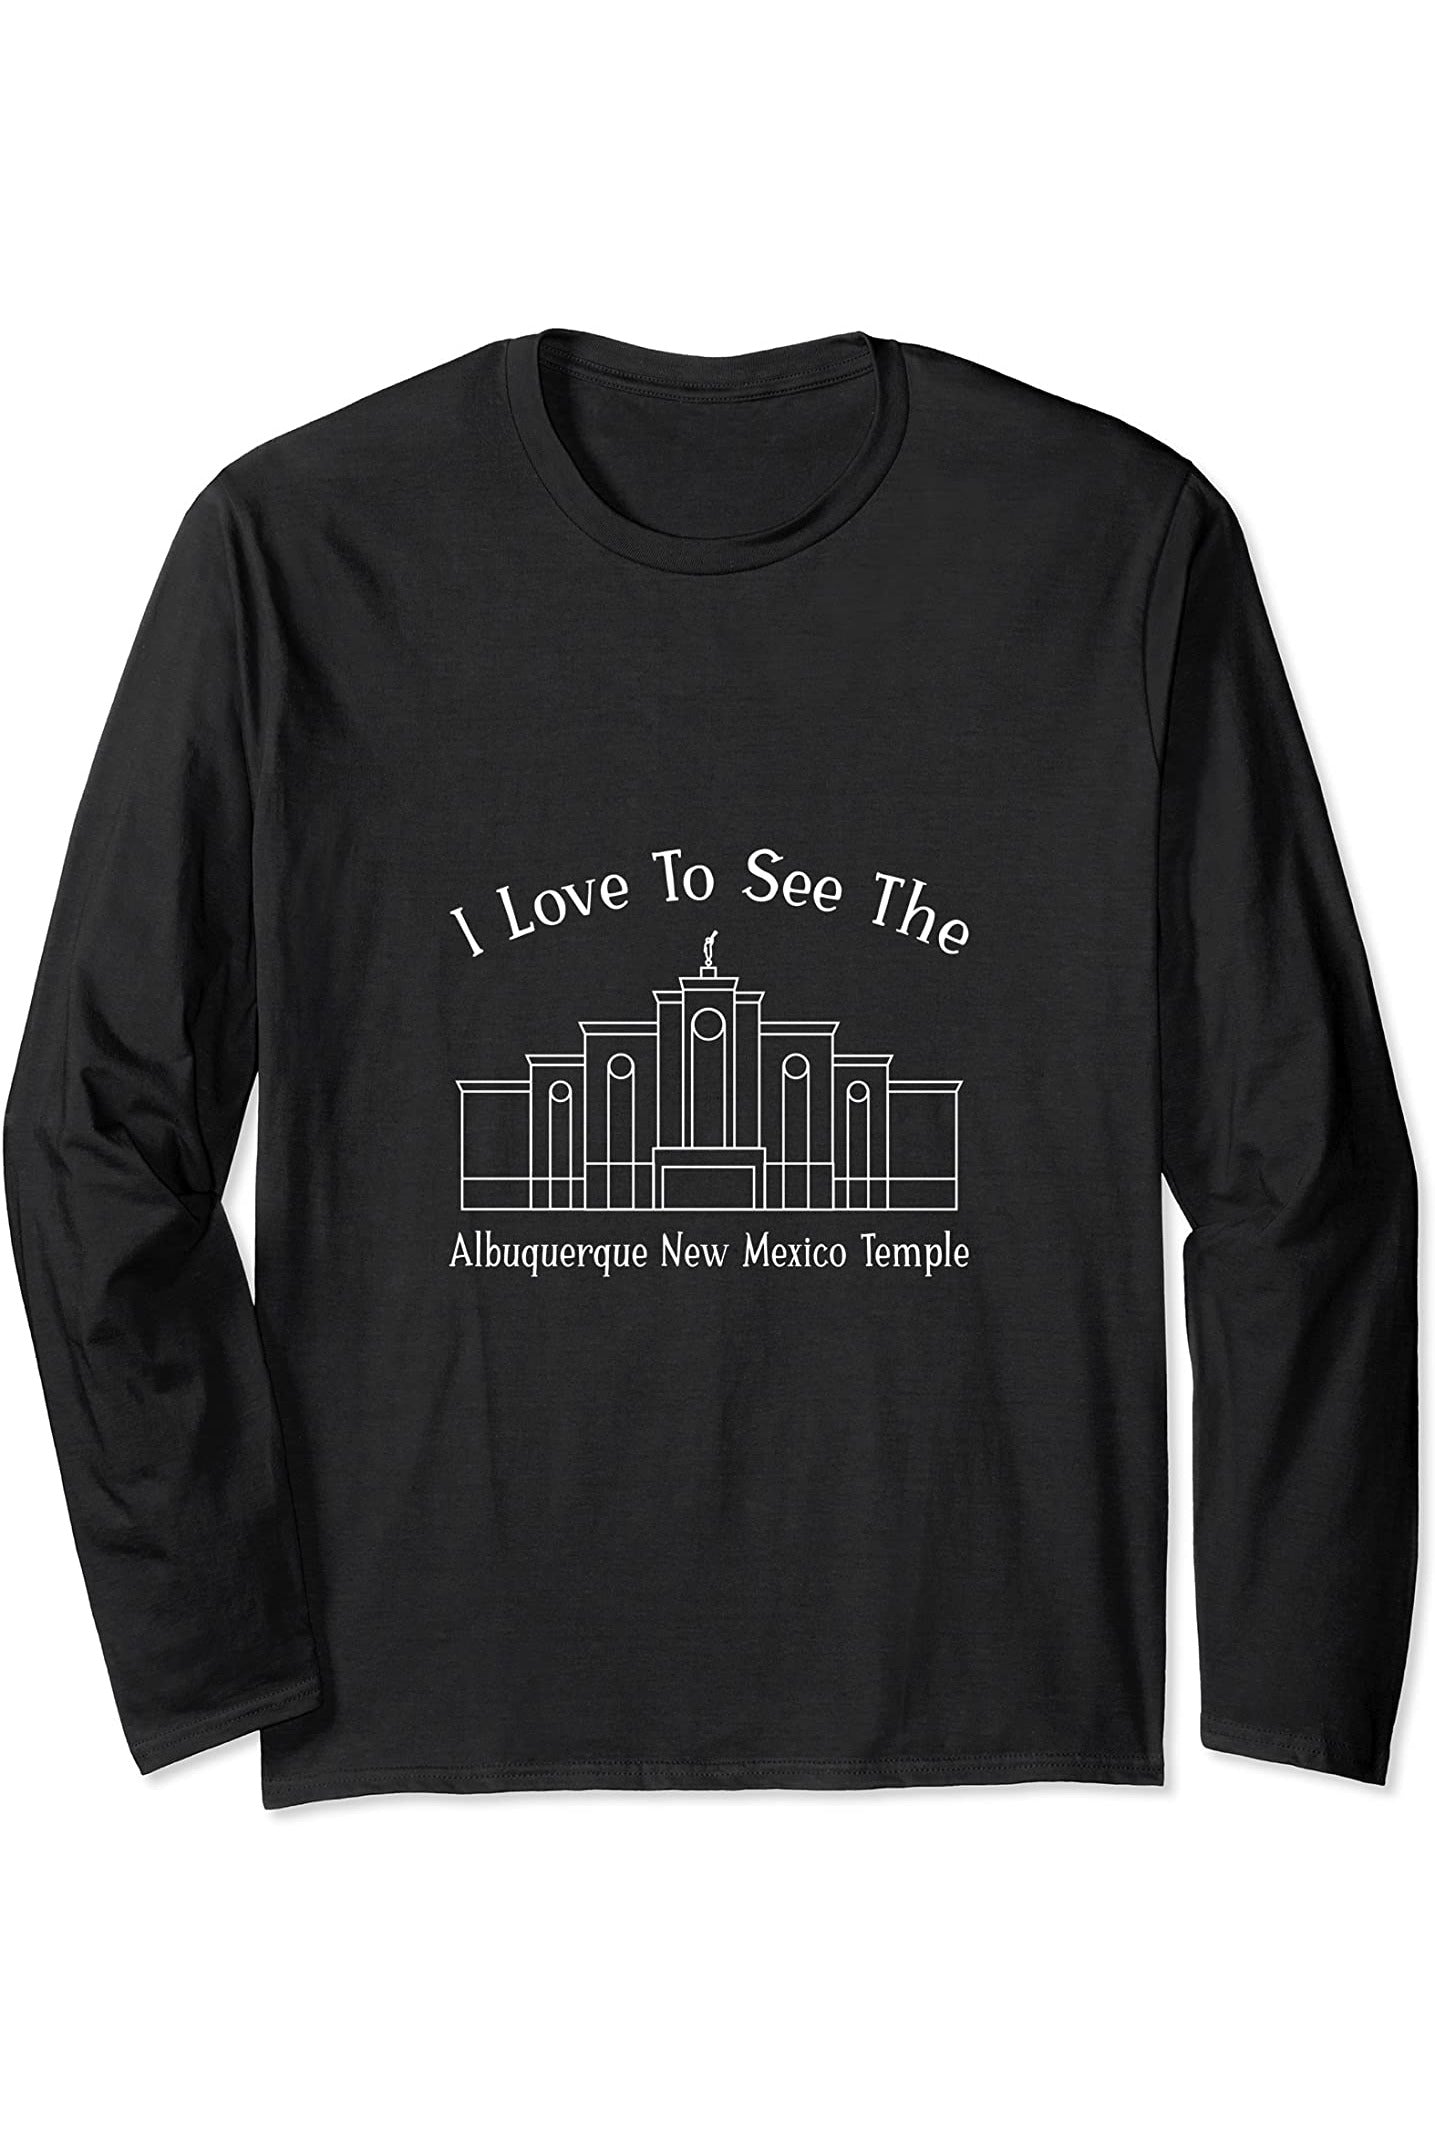 Albuquerque New Mexico Temple Long Sleeve T-Shirt - Happy Style (English) US